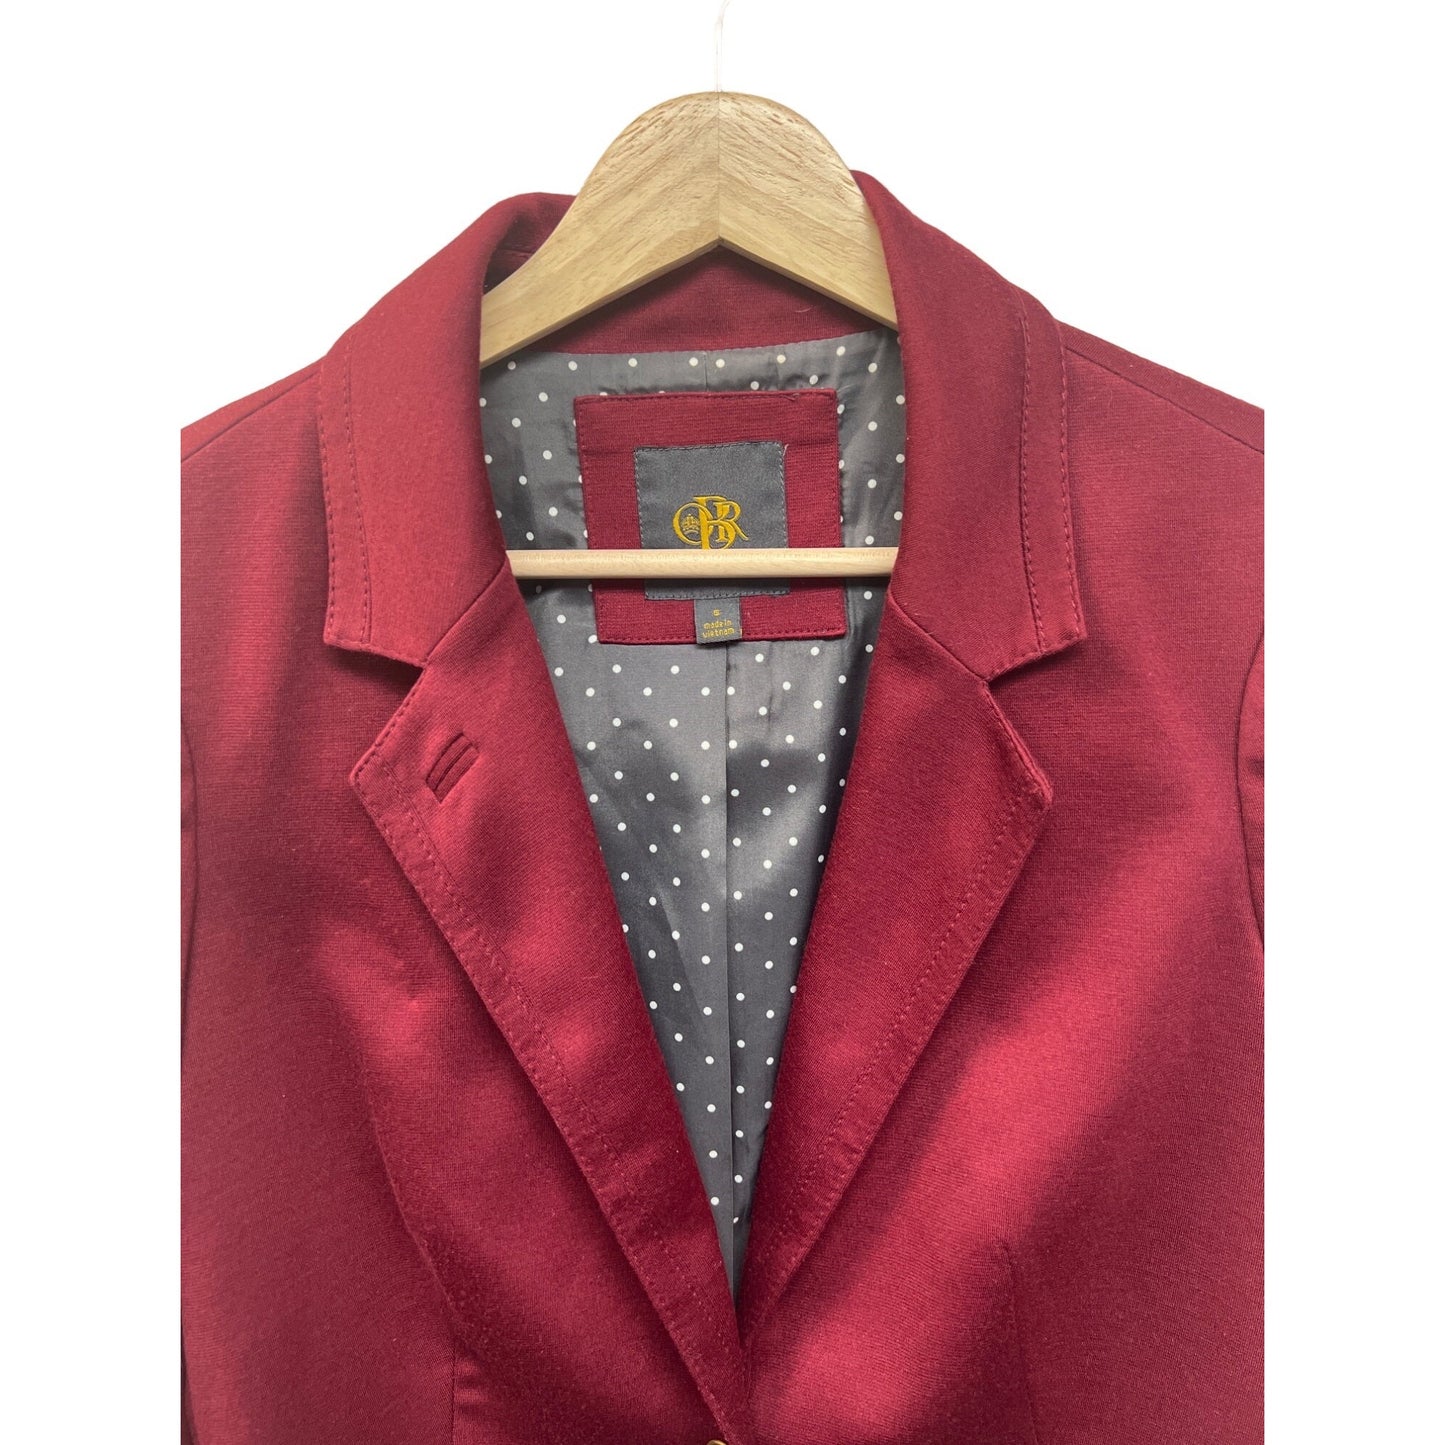 The Limited OBR Wine Red Single Button Blazer with Polka Dot Lining